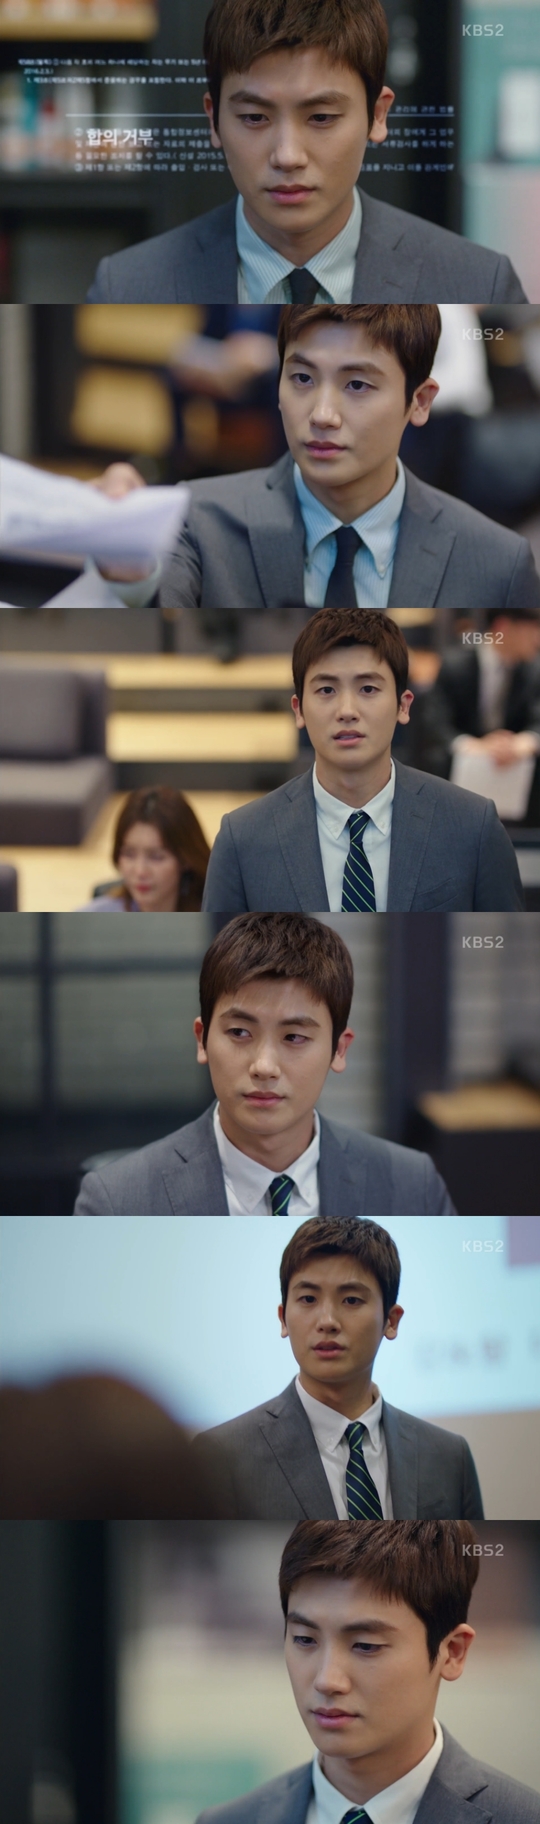 Suits Park Hyung-sik grabbed and shook Dramas Tension.Character, who has to pour out his lines without hesitation, is never simple for an actor; if many of those words are not everyday words, such as legal terms, the burden of an actor is greater.Nevertheless, it is the role of the actor to save the character and the drama with concentrated acting.In this sense, Park Hyung-sik in KBS 2TVs drama Suits (playplayplay by Kim Jung-min/director Kim Jin-woo/production monster union, enter media picture) is inevitably attracting attention.Ko Yeon-woo, played by Park Hyung-sik in Suits, is the owner of a genius matching king that never forgets once you see and understand it.Drama, who hides his identity as a fake new lawyer and enters the nations top law firm, meets with a legendary lawyer there and plays chewy court play and romance, is Suits.To this end, Park Hyung-sik is making the color of the drama by pouring out professional legal terms every time.But Park Hyung-sik didnt stop here.Feeling and situation of the person who changes every moment are filled with intense hot rolling and exquisite control, and shake the tension of the drama.In the scene of the Moot court in the 6th episode of Suits, which was broadcast on May 10, the concentration and ability of the actor Park Hyung-sik were intensely shining.In the play, Moot Court is a great opportunity for new lawyers. Ko Yeon-woo has faced a cowardly capitalist enemy in this important Moot Court.Ko Yeon-woo showed genius matching king and base, and overcame the crisis and took control of the moot court.But like the real court, Moot court could not simply be cut with black and white.Kim Ji-na (Go Sung-hee), who shared a secret with Ko Yeon-woo, was involved and several Feelings were complicated and subtle.A situation where Kim Ji-na must be pushed harder to win the Moot court.But because she was the only one who knew her secret, she could not push Kim Ji-na, who was shaking, misunderstanding that the secret would be revealed.The will for victory, pushing, shaking Feeling, and giving up victory for the other party.In a relatively short time in which the Moot court unfolds, Park Hyung-sik delicately captures these Feeling changes.All of Park Hyung-siks things moved organically with the Feeling line of Ko Yeon-woo.Depending on the situation, Feeling and acting also have different amplitudes, and the completed control called the tension of the entire Moot court scene.Thanks to this, viewers in front of the TV were able to immerse themselves in the change of Feeling of Ko Yeon-woo.Suits is a drama with many advantages.Another important viewing point was added, in addition to the most superficially revealed two mens bromances, chewy court play, and the unpredictable chemistry of three-dimensional figures: a stunning Tension.And the character who showed the tension thrill is the actor Park Hyung-sik who painted it.Another Tension that Park Hyung-sik in Suits will make is curious and expected.kim ye-eun